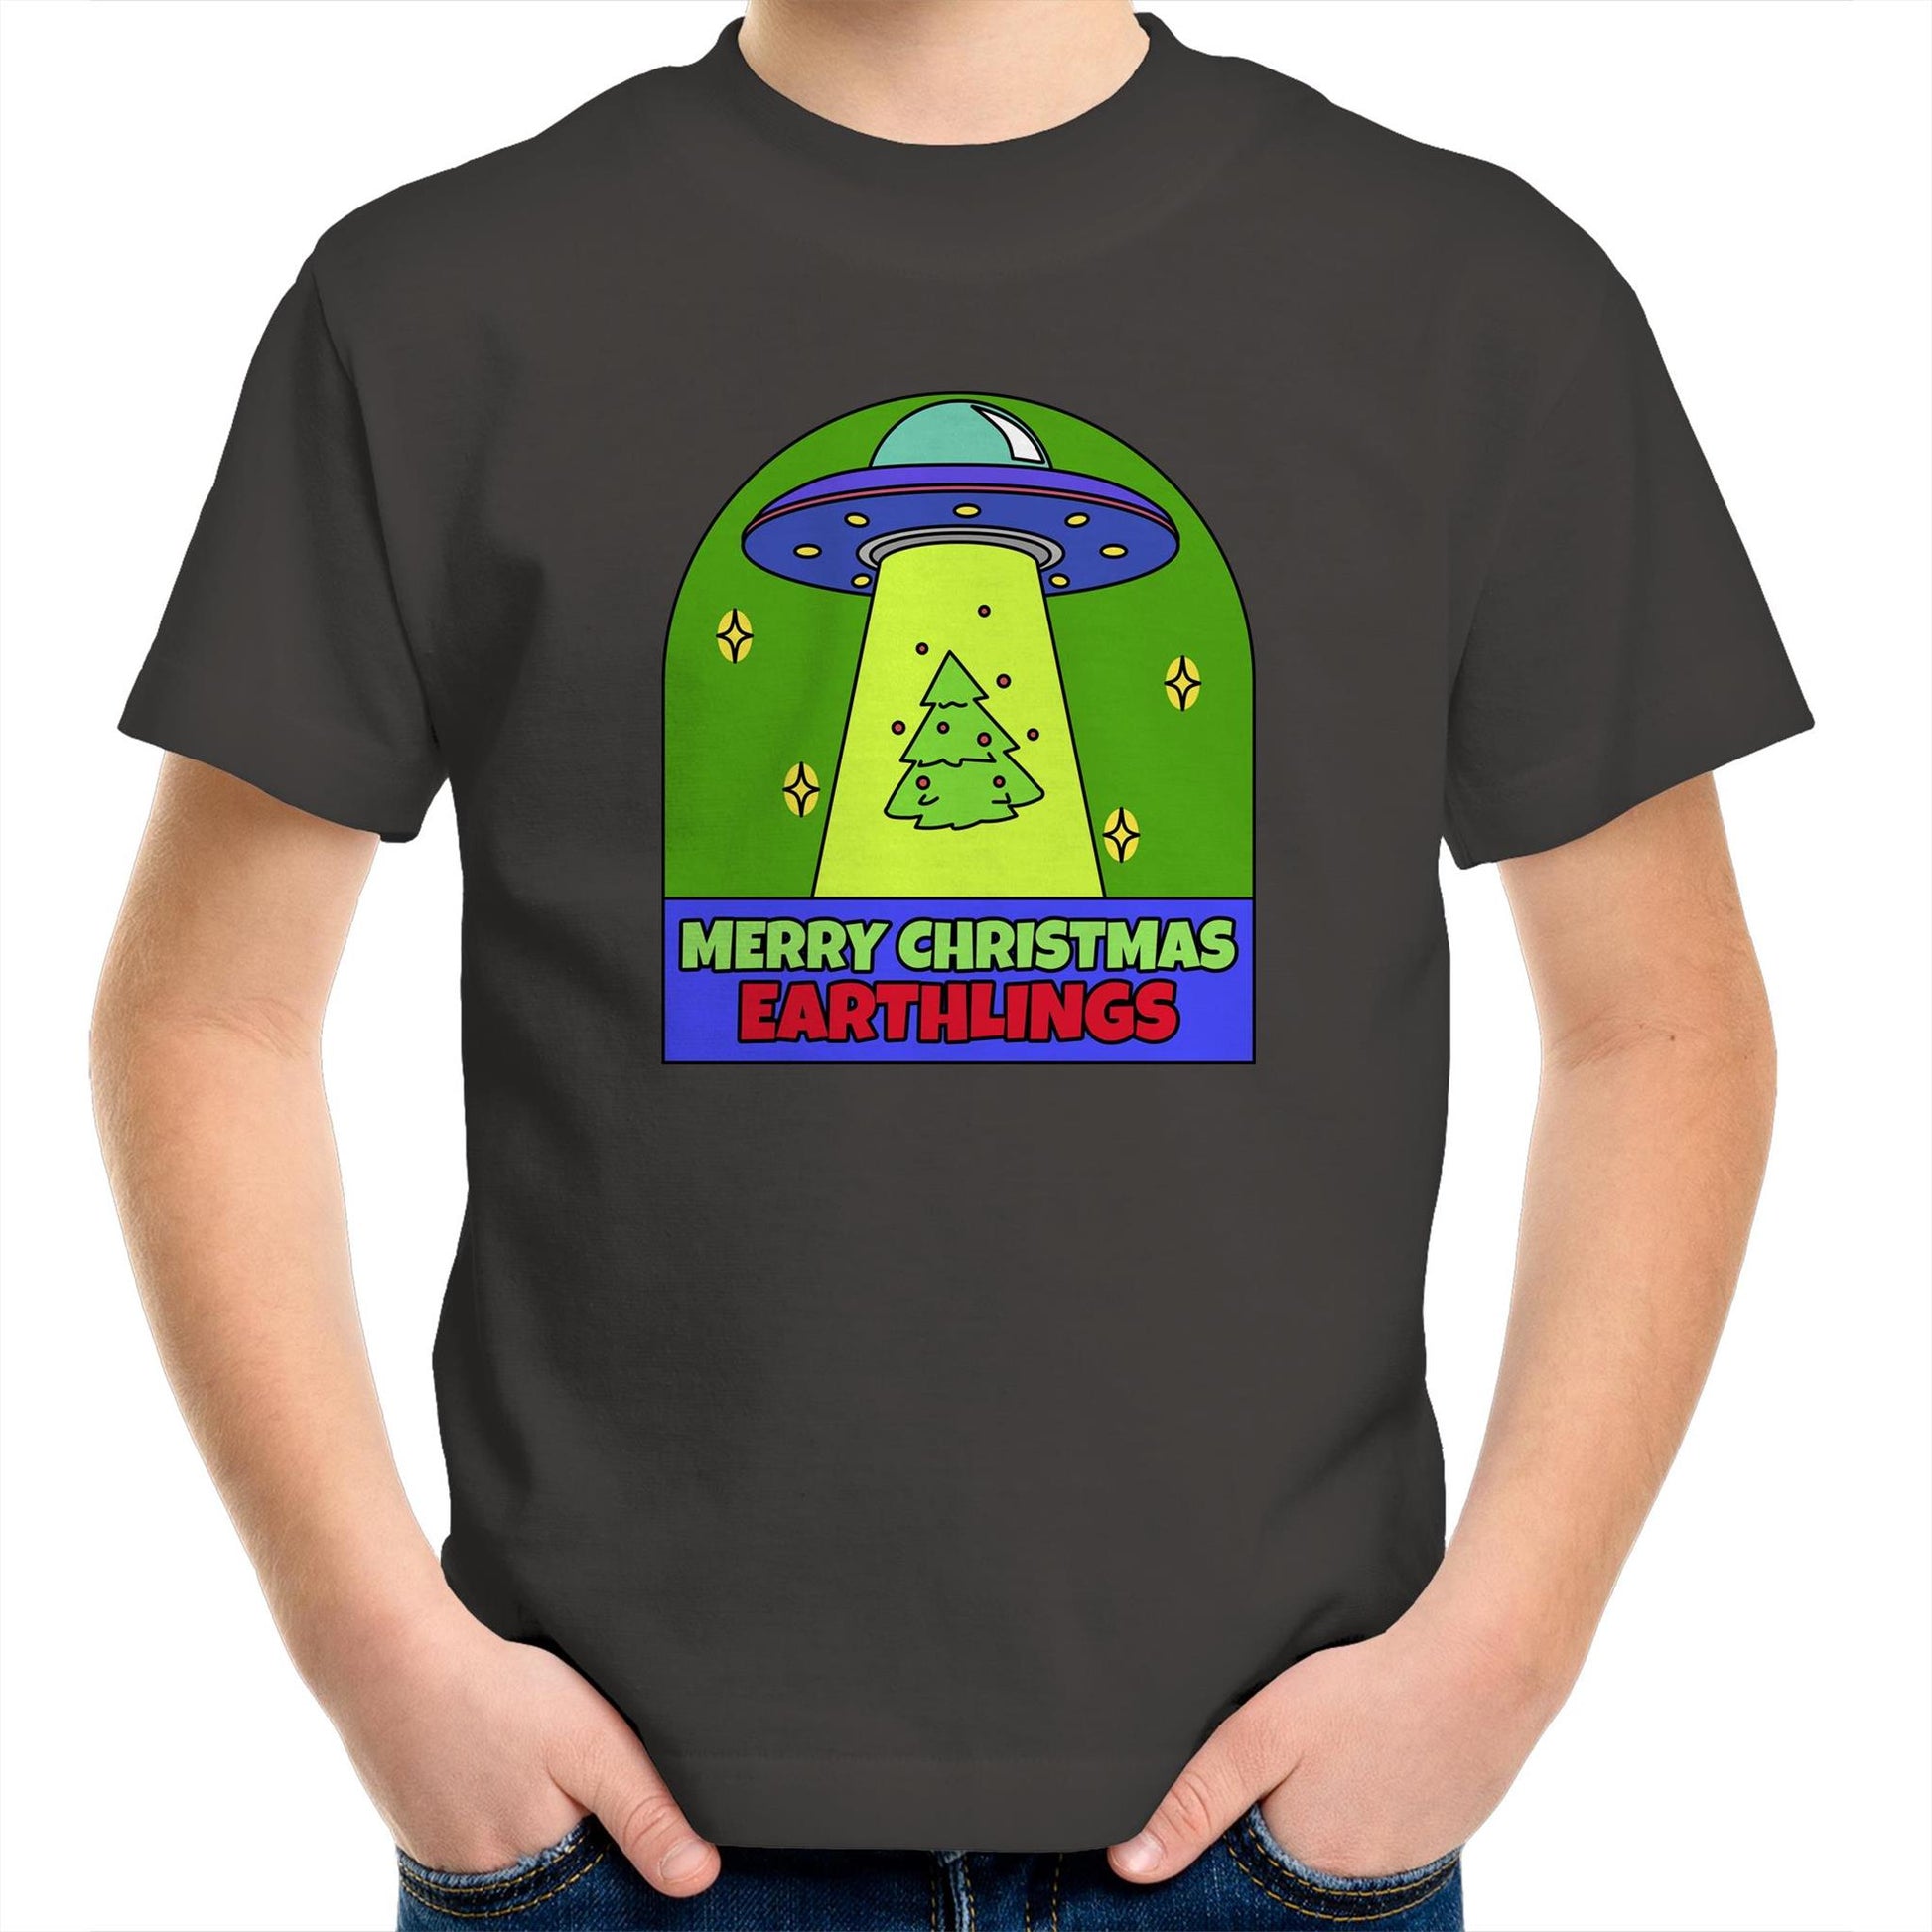 Merry Christmas Earthlings, UFO - Kids Youth T-Shirt Charcoal Christmas Kids T-shirt Merry Christmas